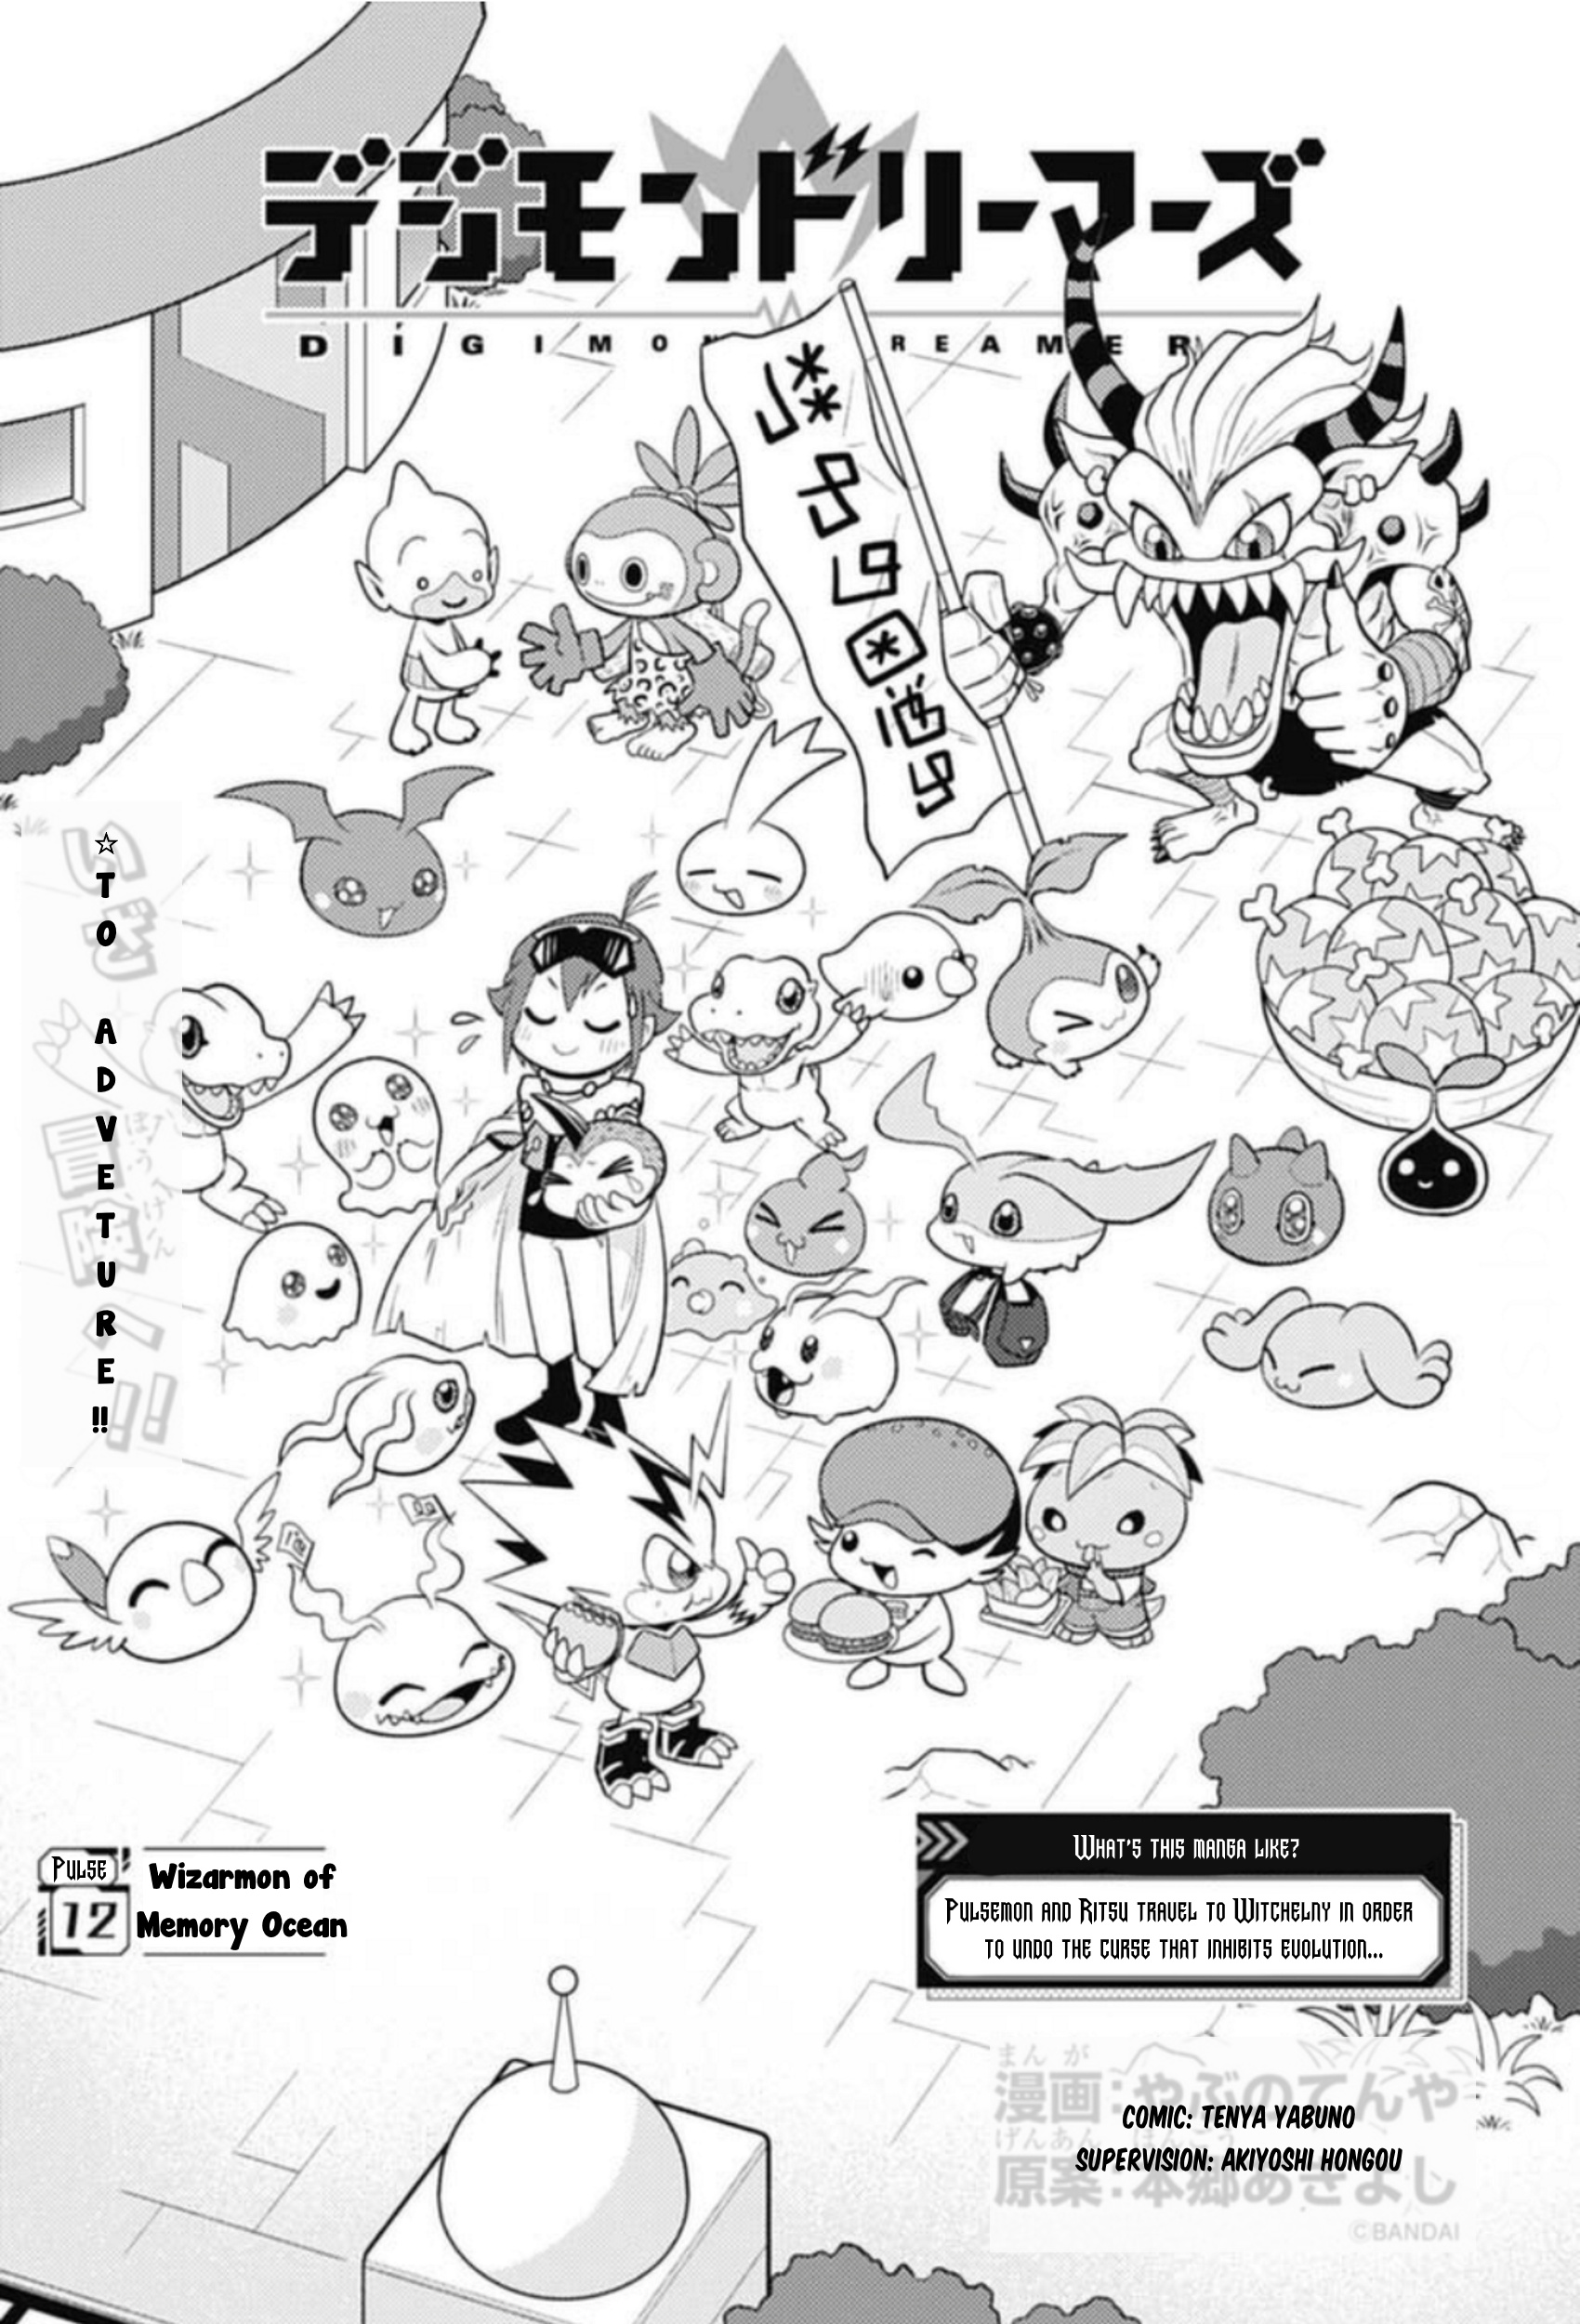 Digimon Dreamers Vol.1 Chapter 12: Wizarmon Of Memory Ocean - Picture 2